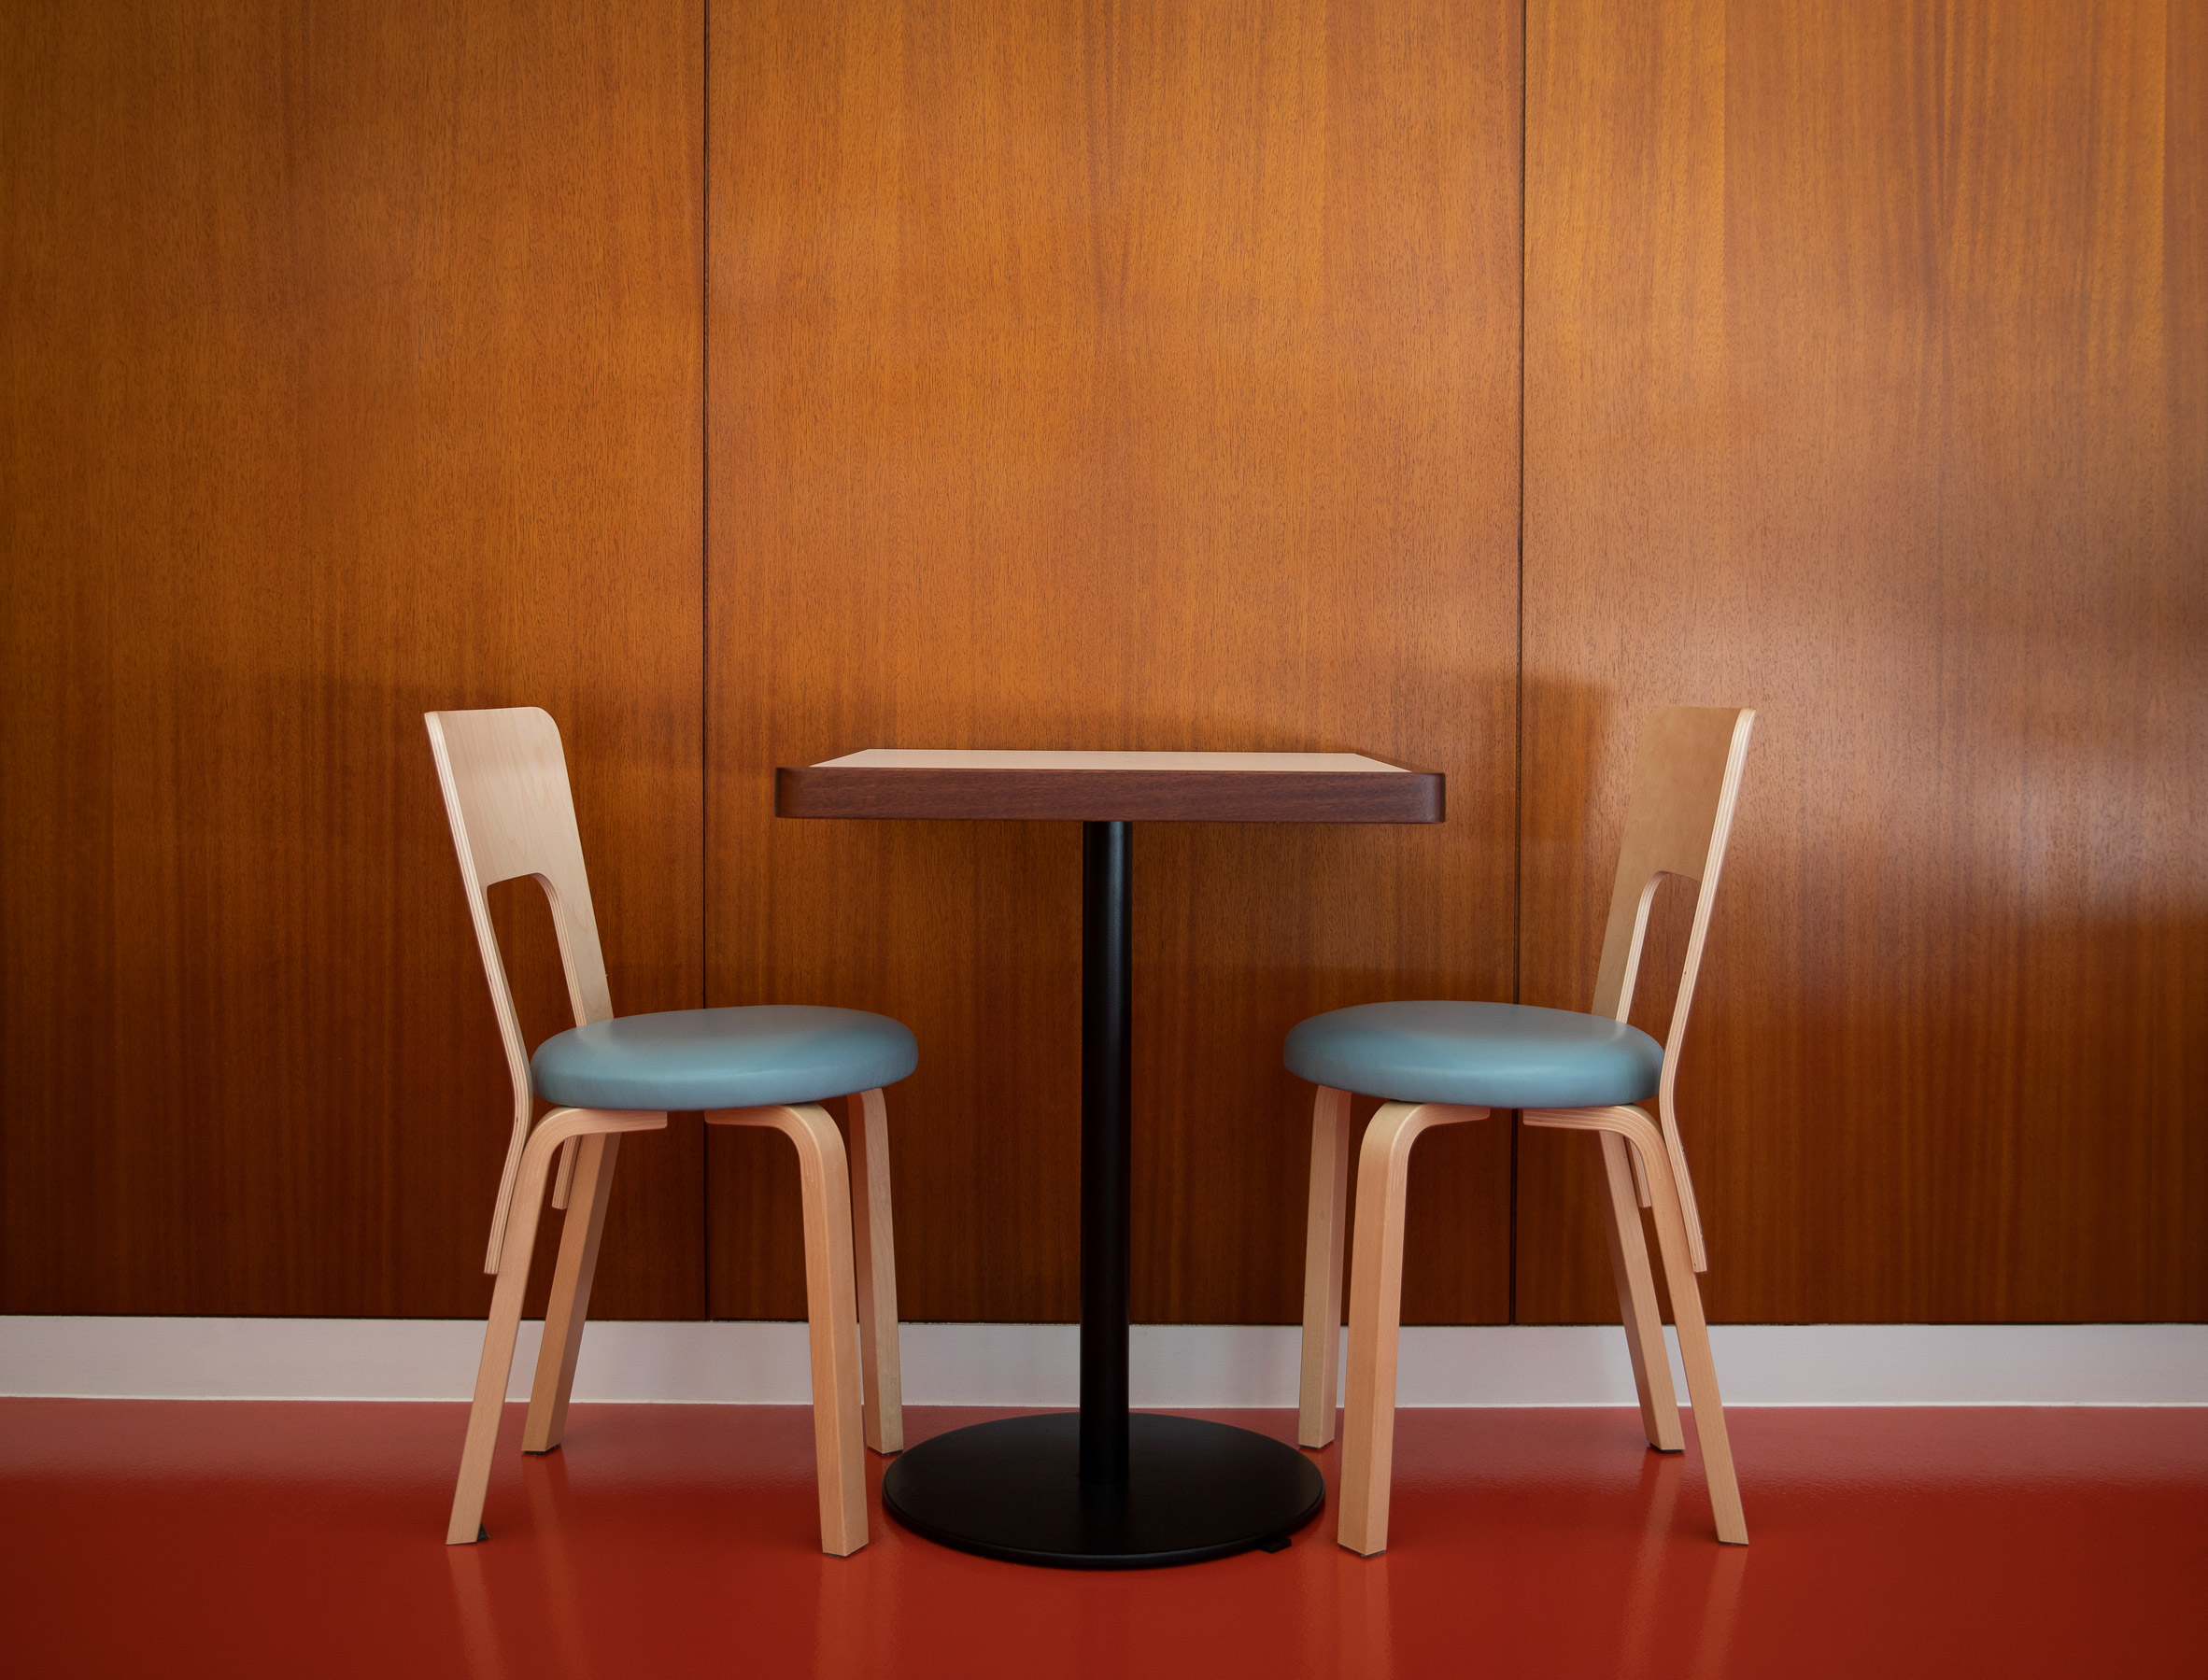 Dining chairs against wood-panelled walls in Cafe Bao